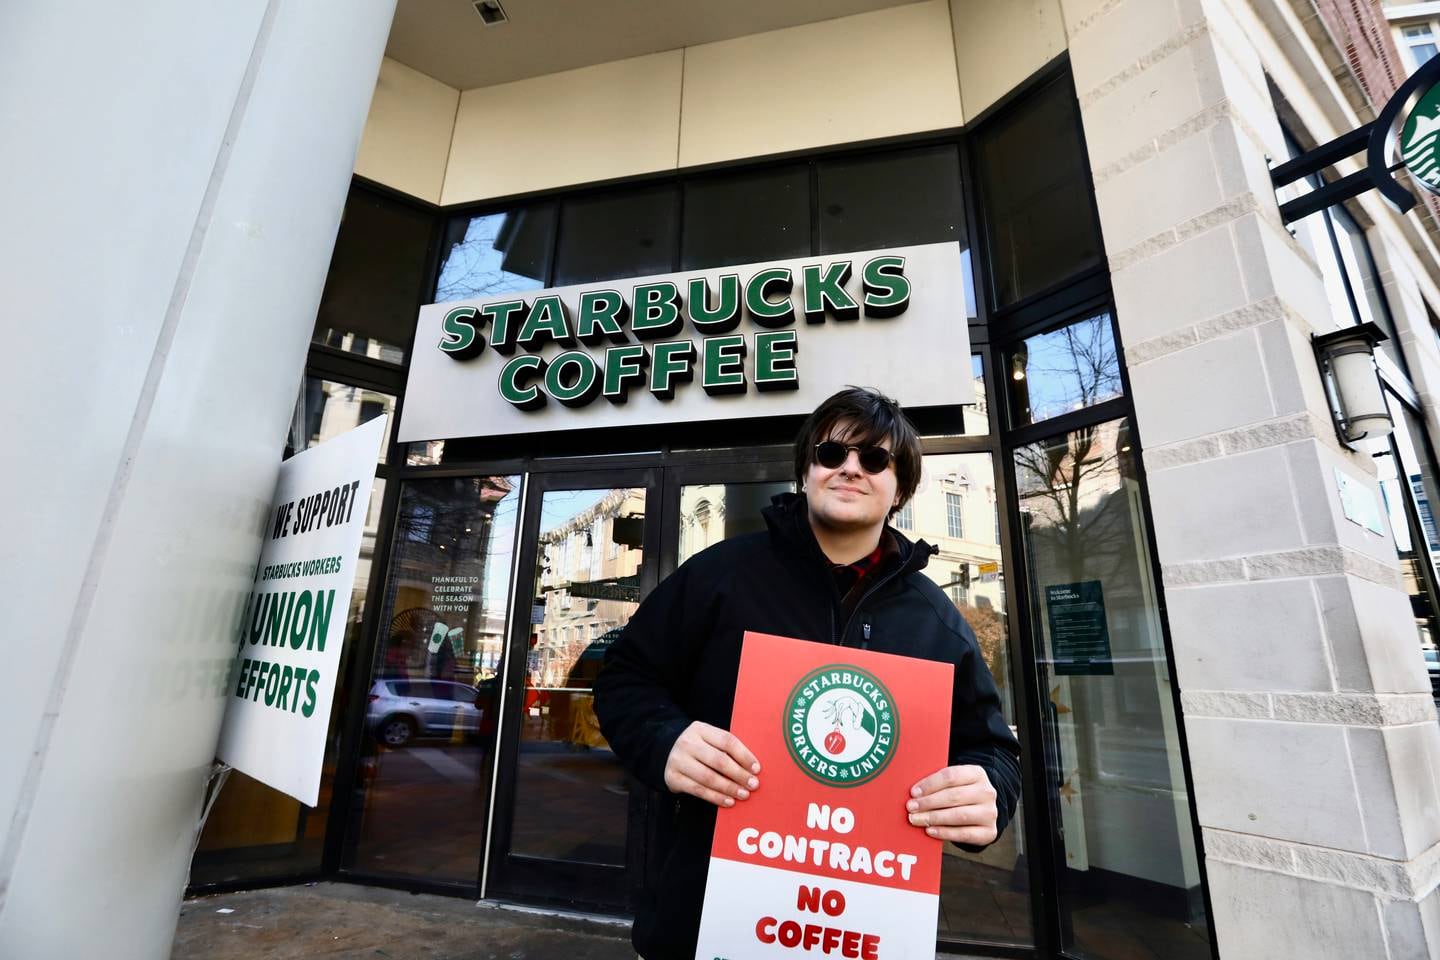 Violet bovine (she/her) and Starbucks employees cite labor issues while on strike at Baltimore’s North Charles St, location.